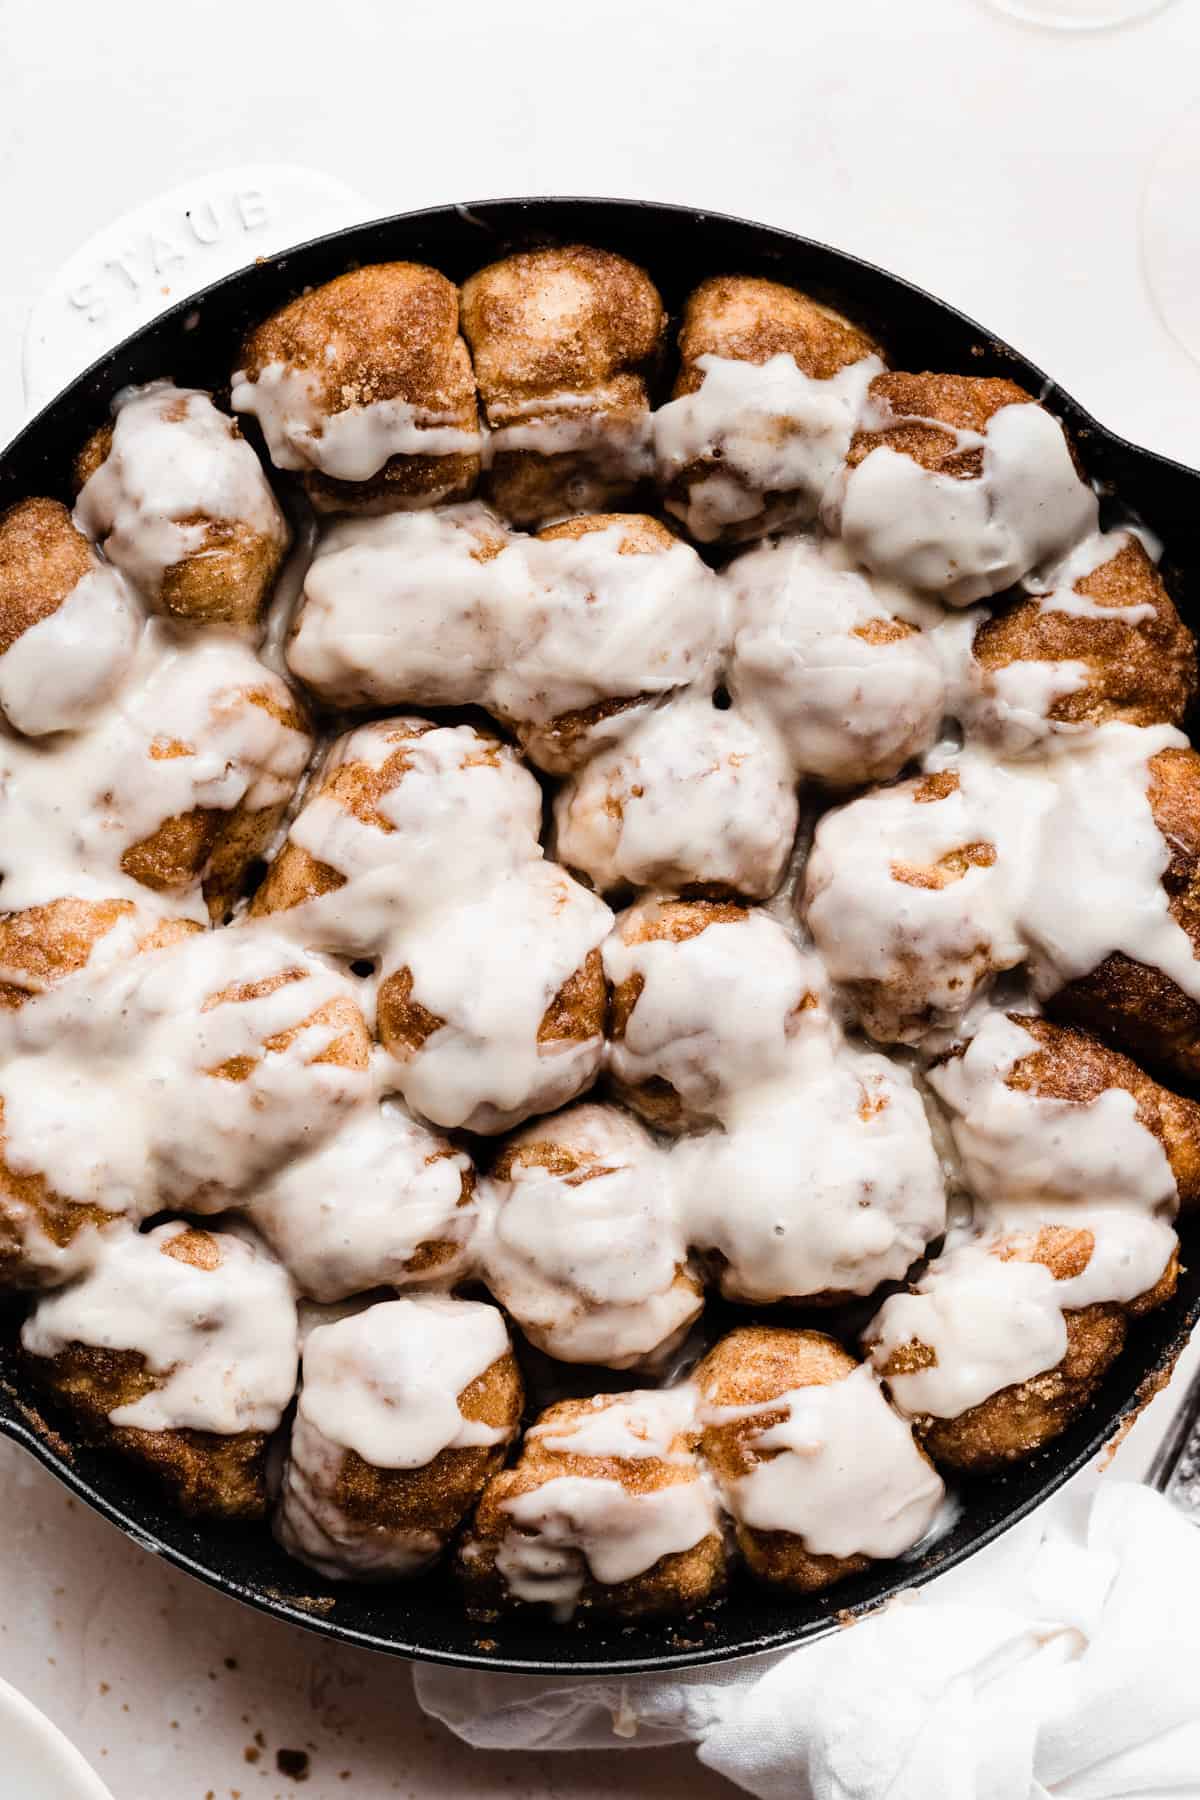 A skillet of baked pieces of cinnamon sugared dough topped with a glaze